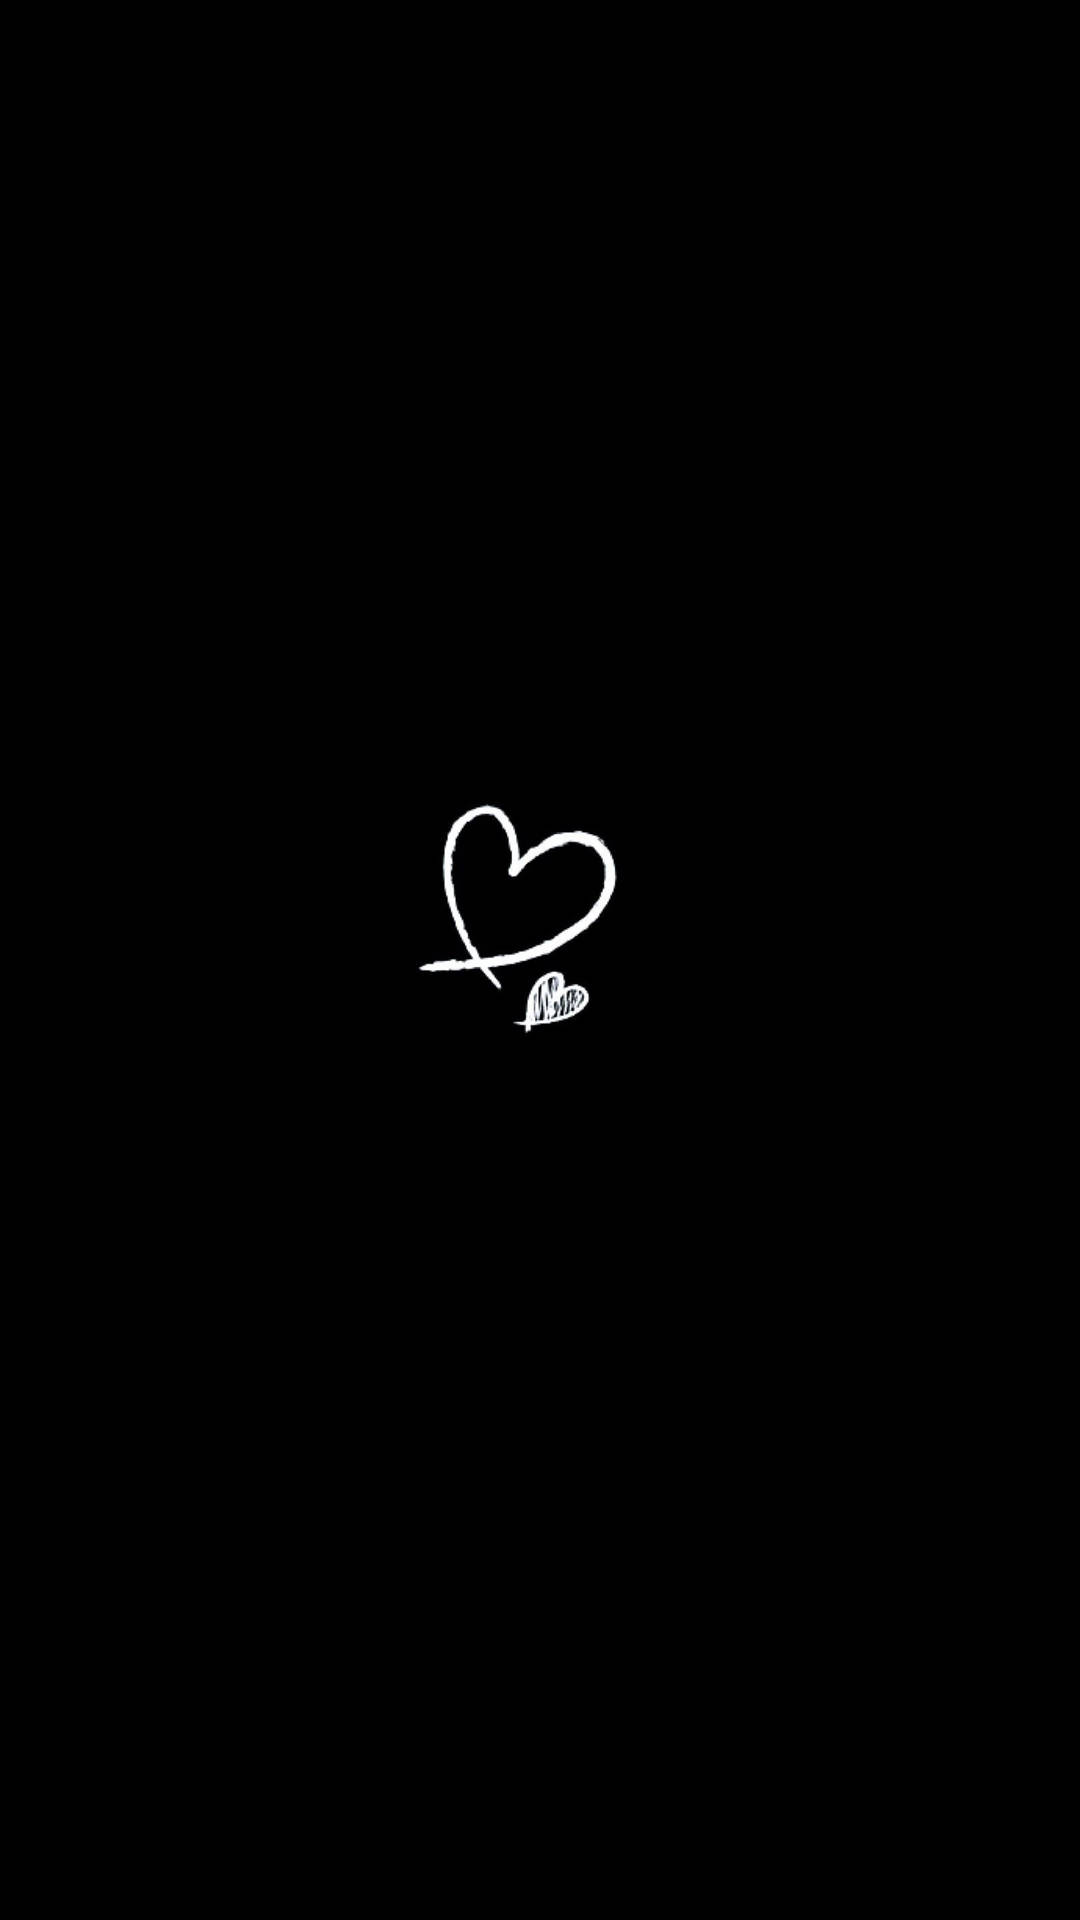 Download Cute Black And White Aesthetic Heart Doodle Wallpaper | Wallpapers .com